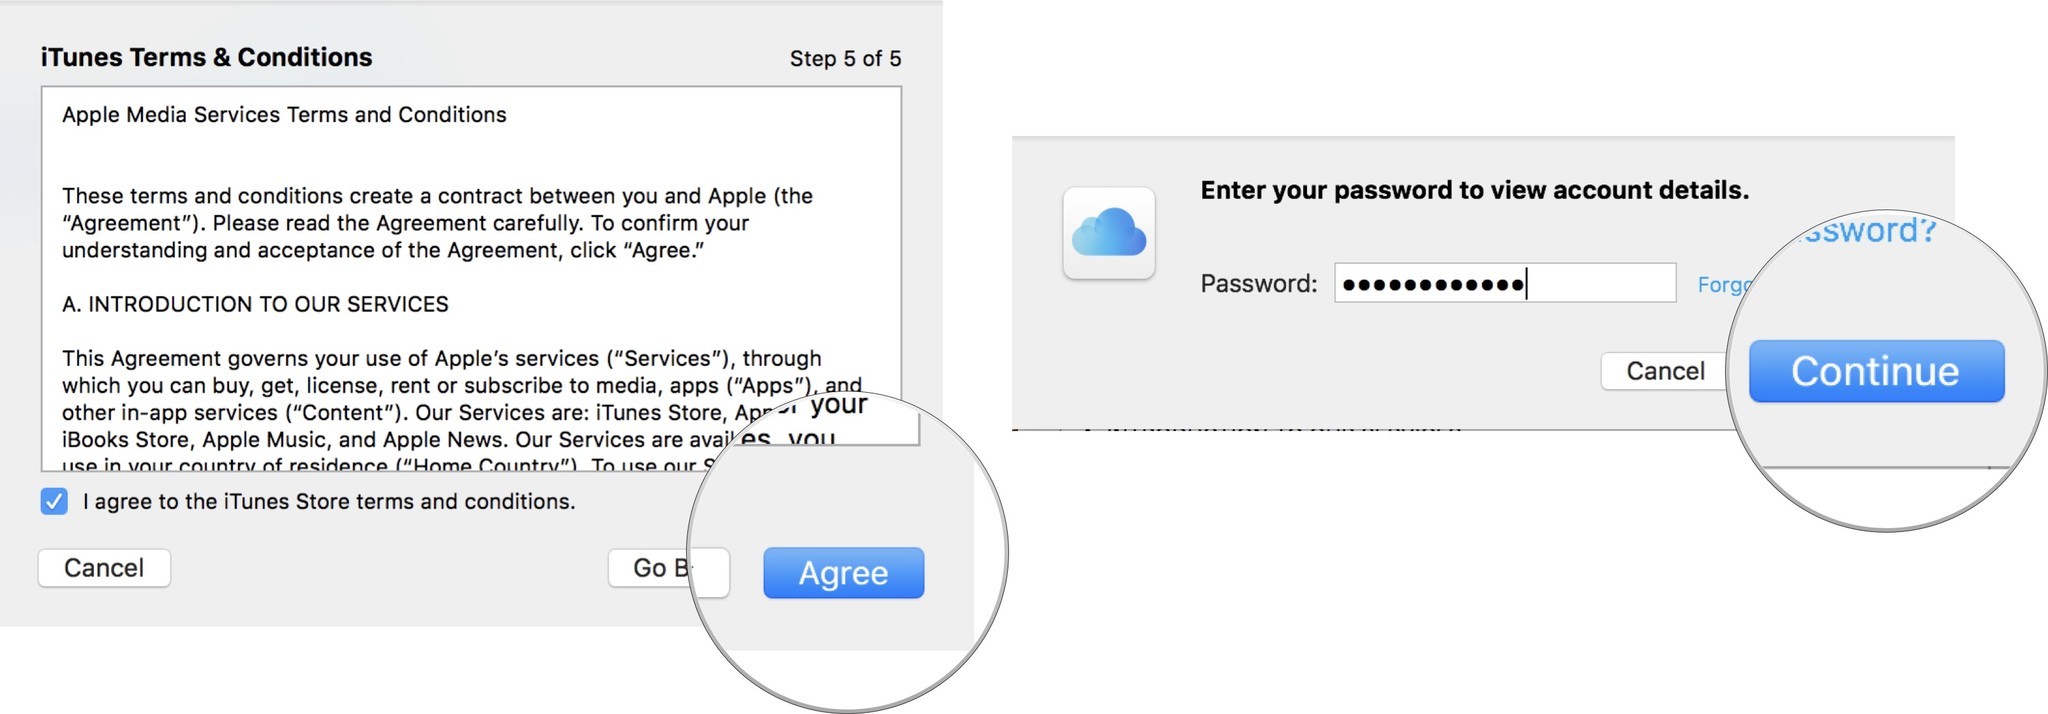 Add a child account: Agree to iCloud T&C, then click Agree, then agree to Game Center, then click agree